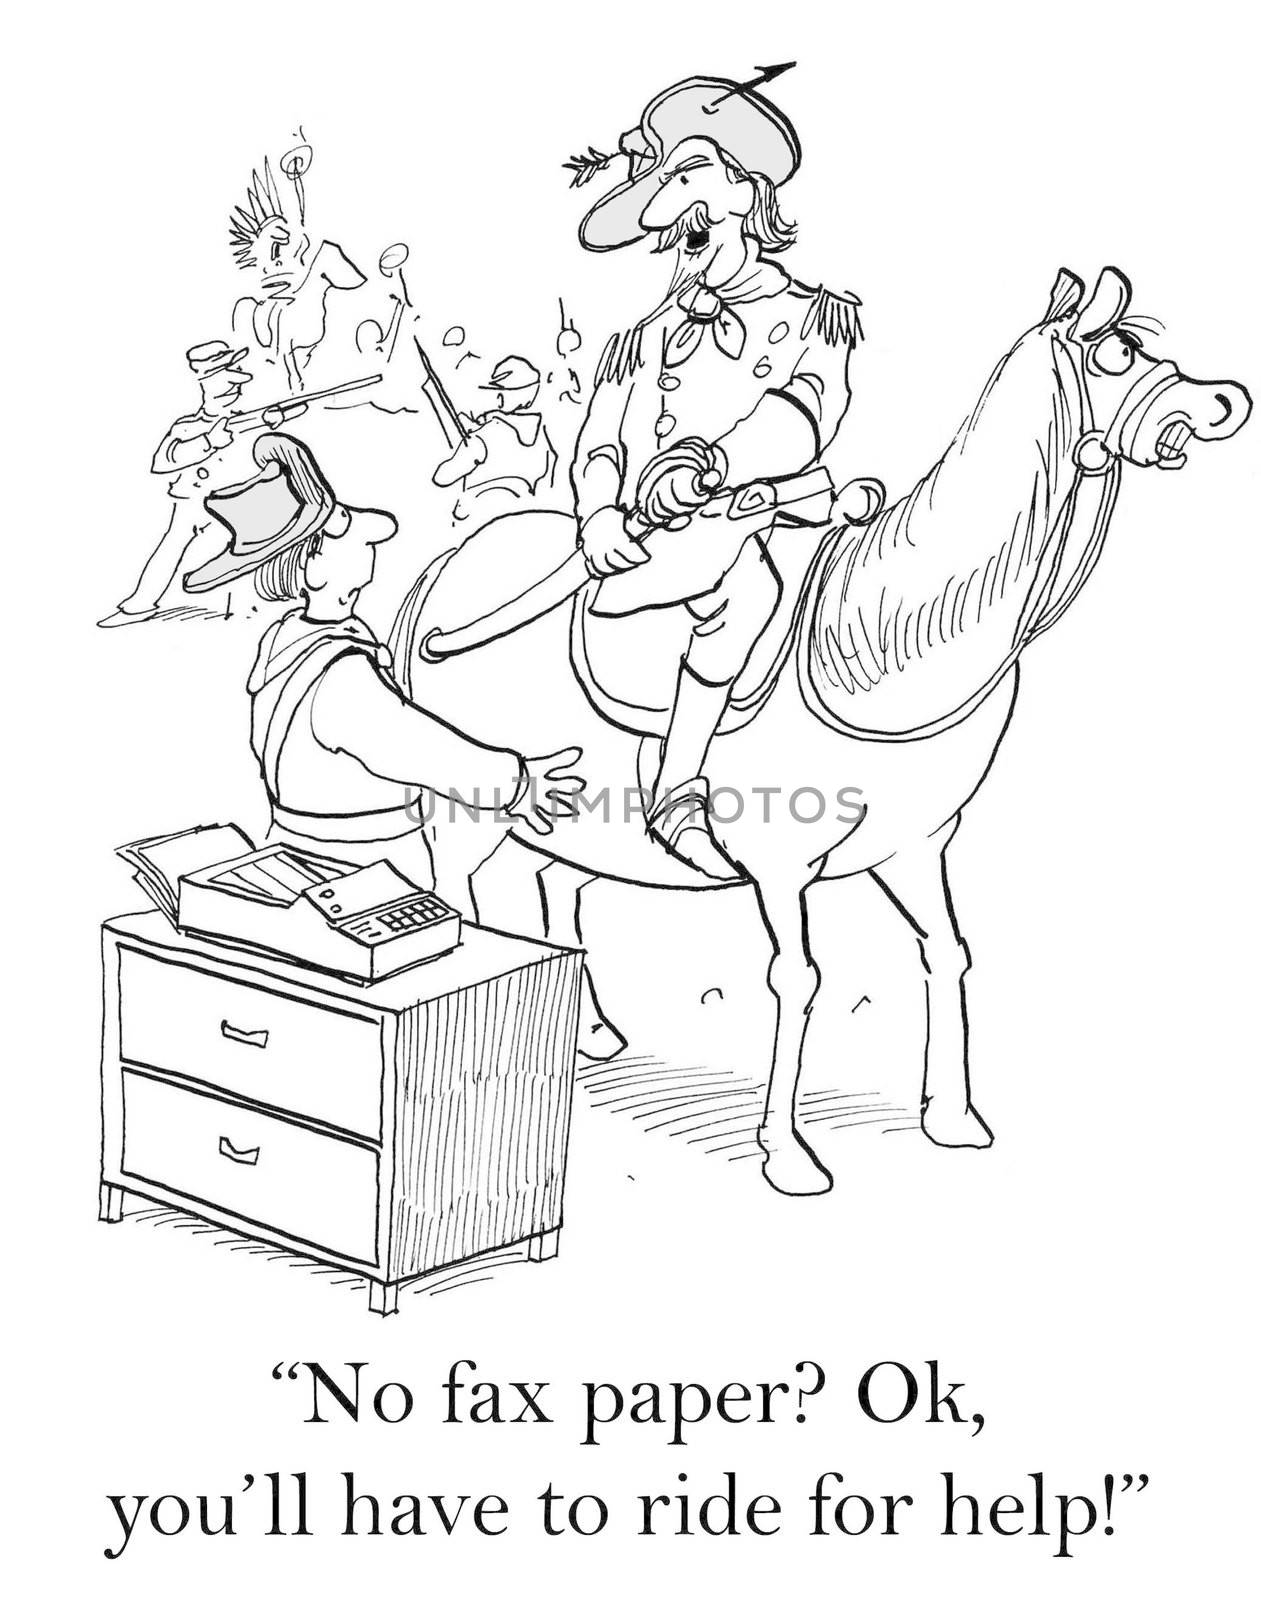 "No fax paper? Ok, you'll have to ride for help."